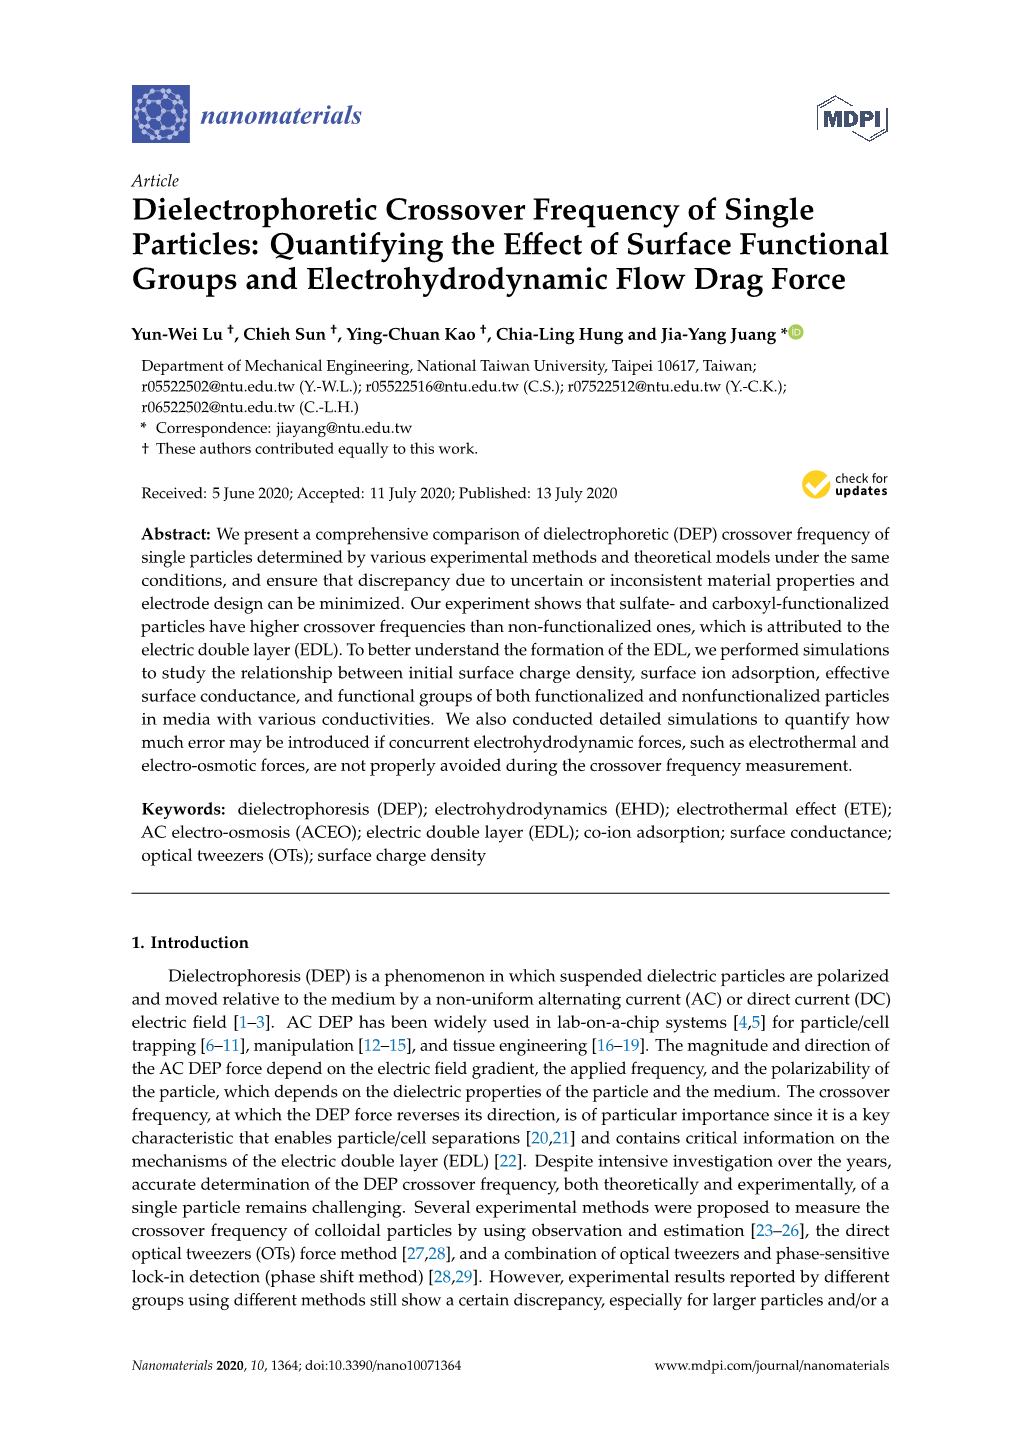 Dielectrophoretic Crossover Frequency of Single Particles: Quantifying the Eﬀect of Surface Functional Groups and Electrohydrodynamic Flow Drag Force